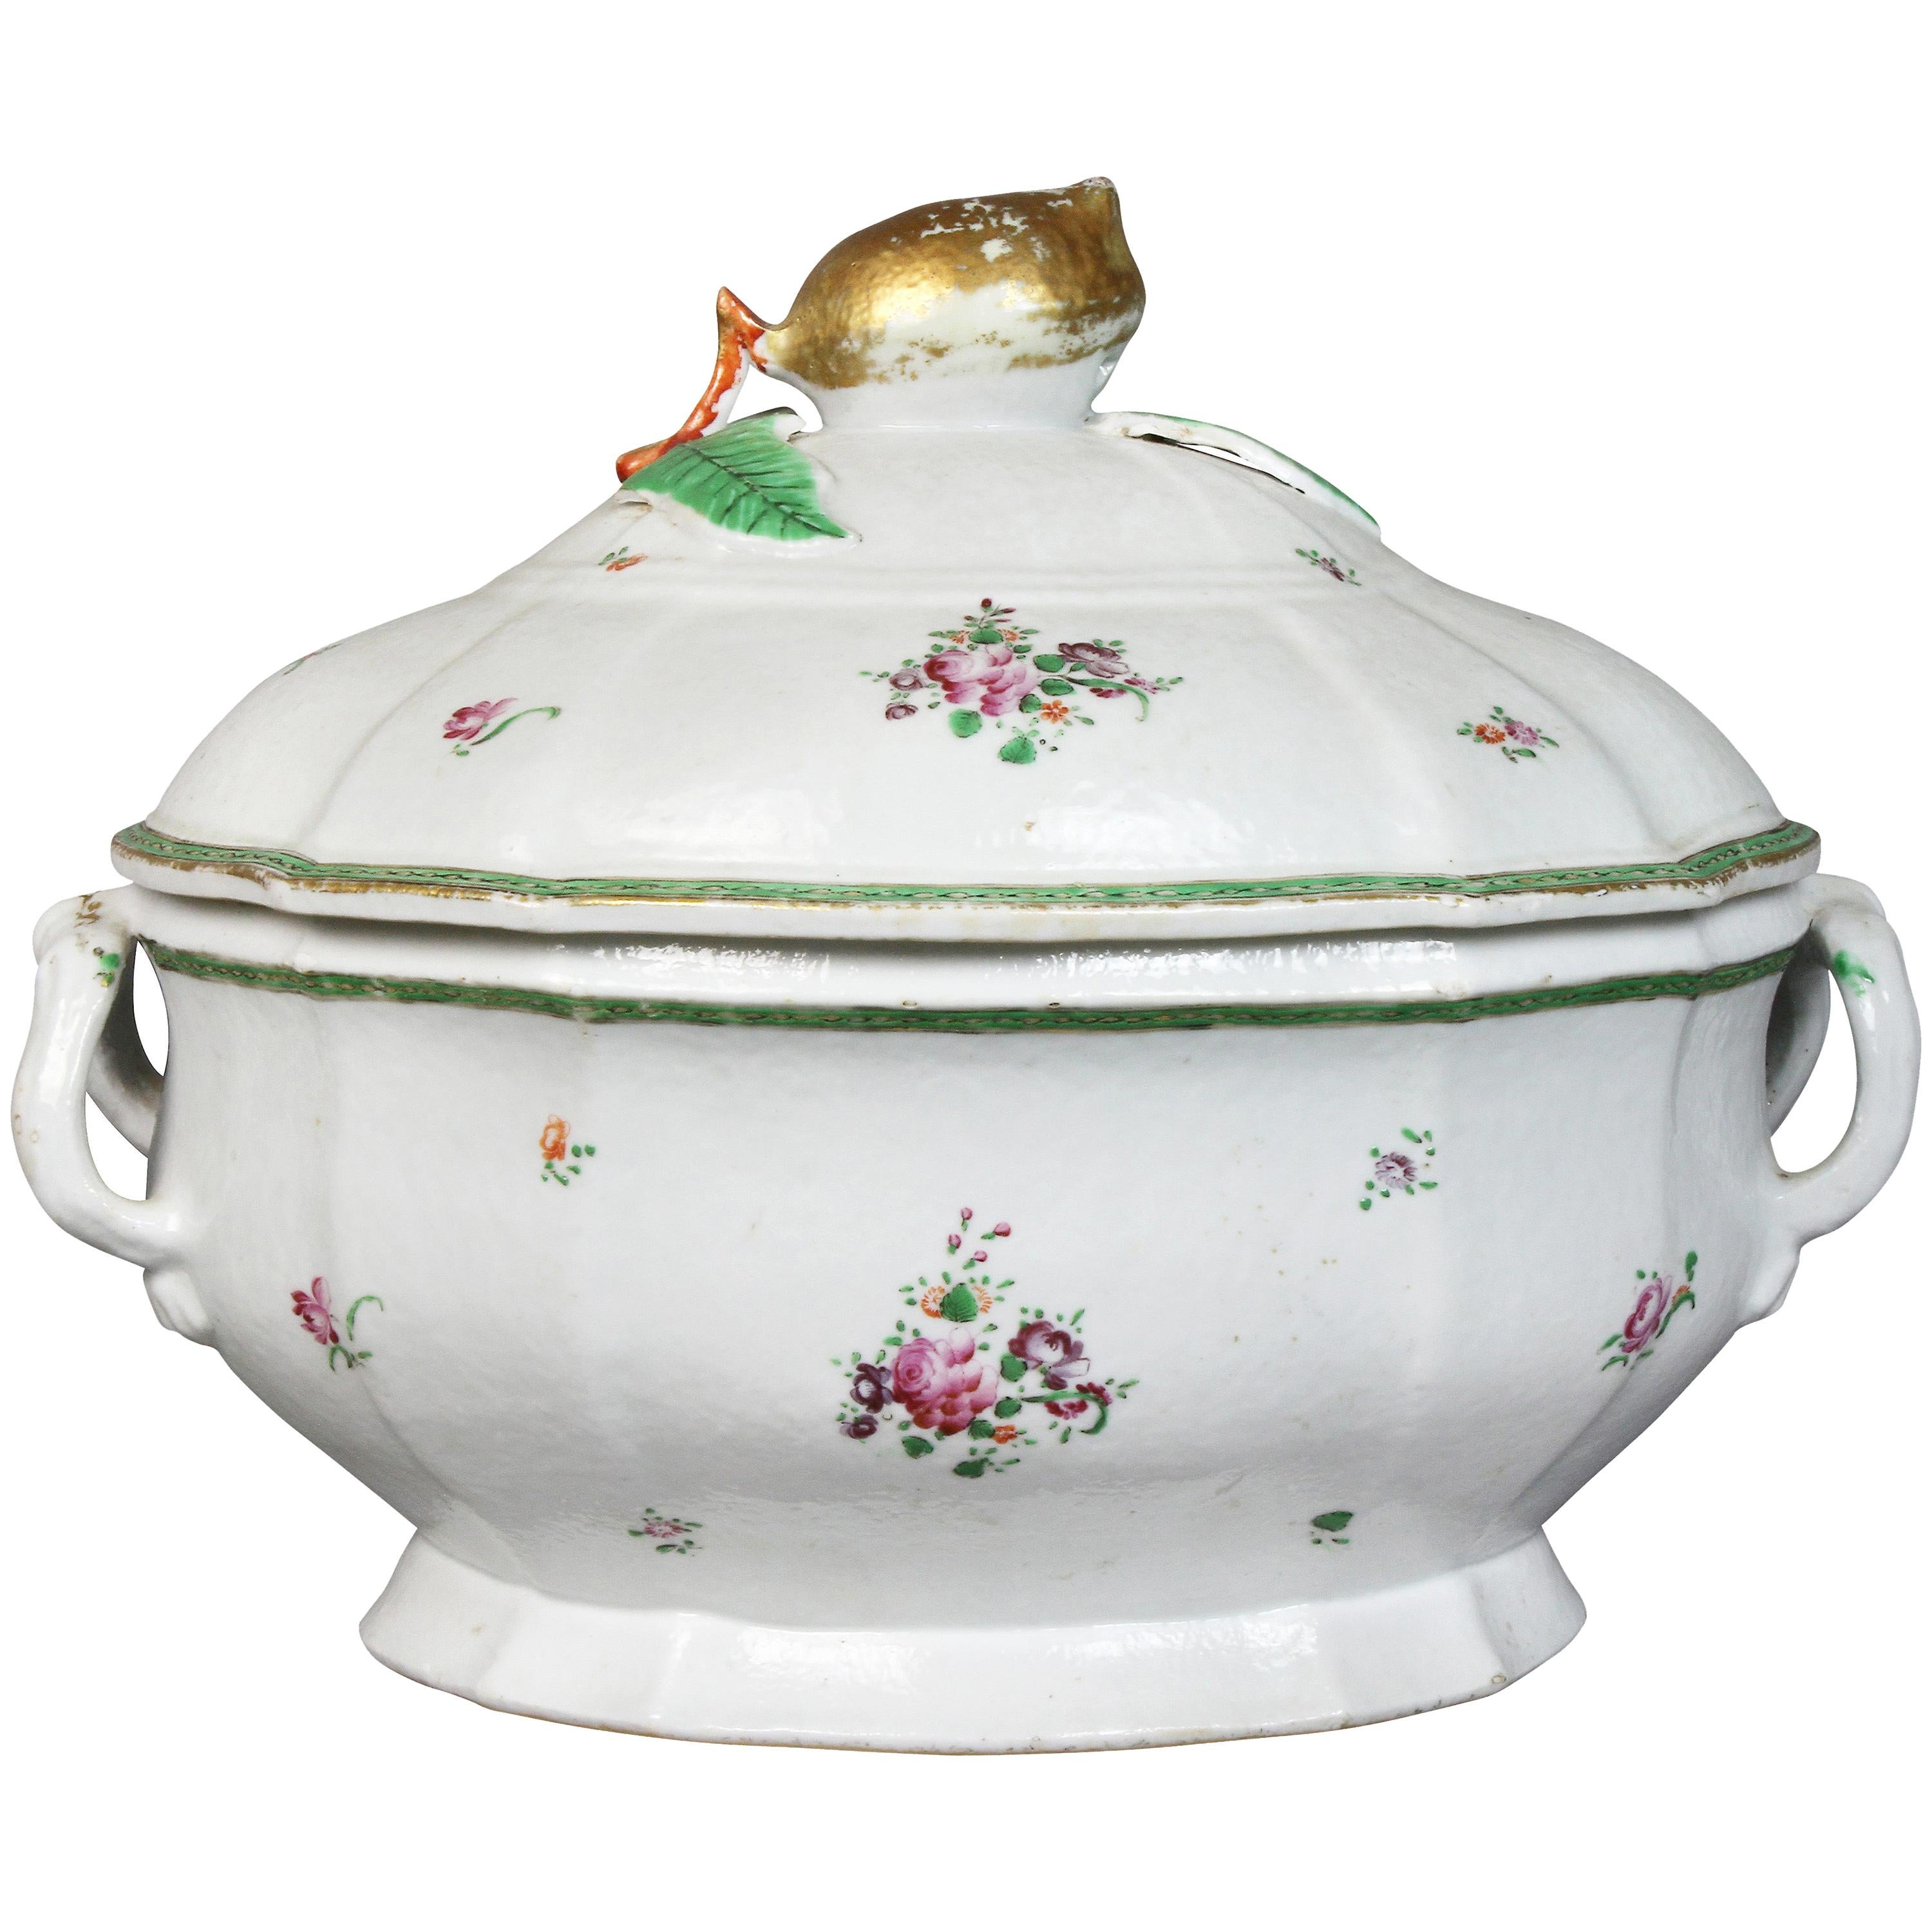 Chinese Export Porcelain Soup Tureen